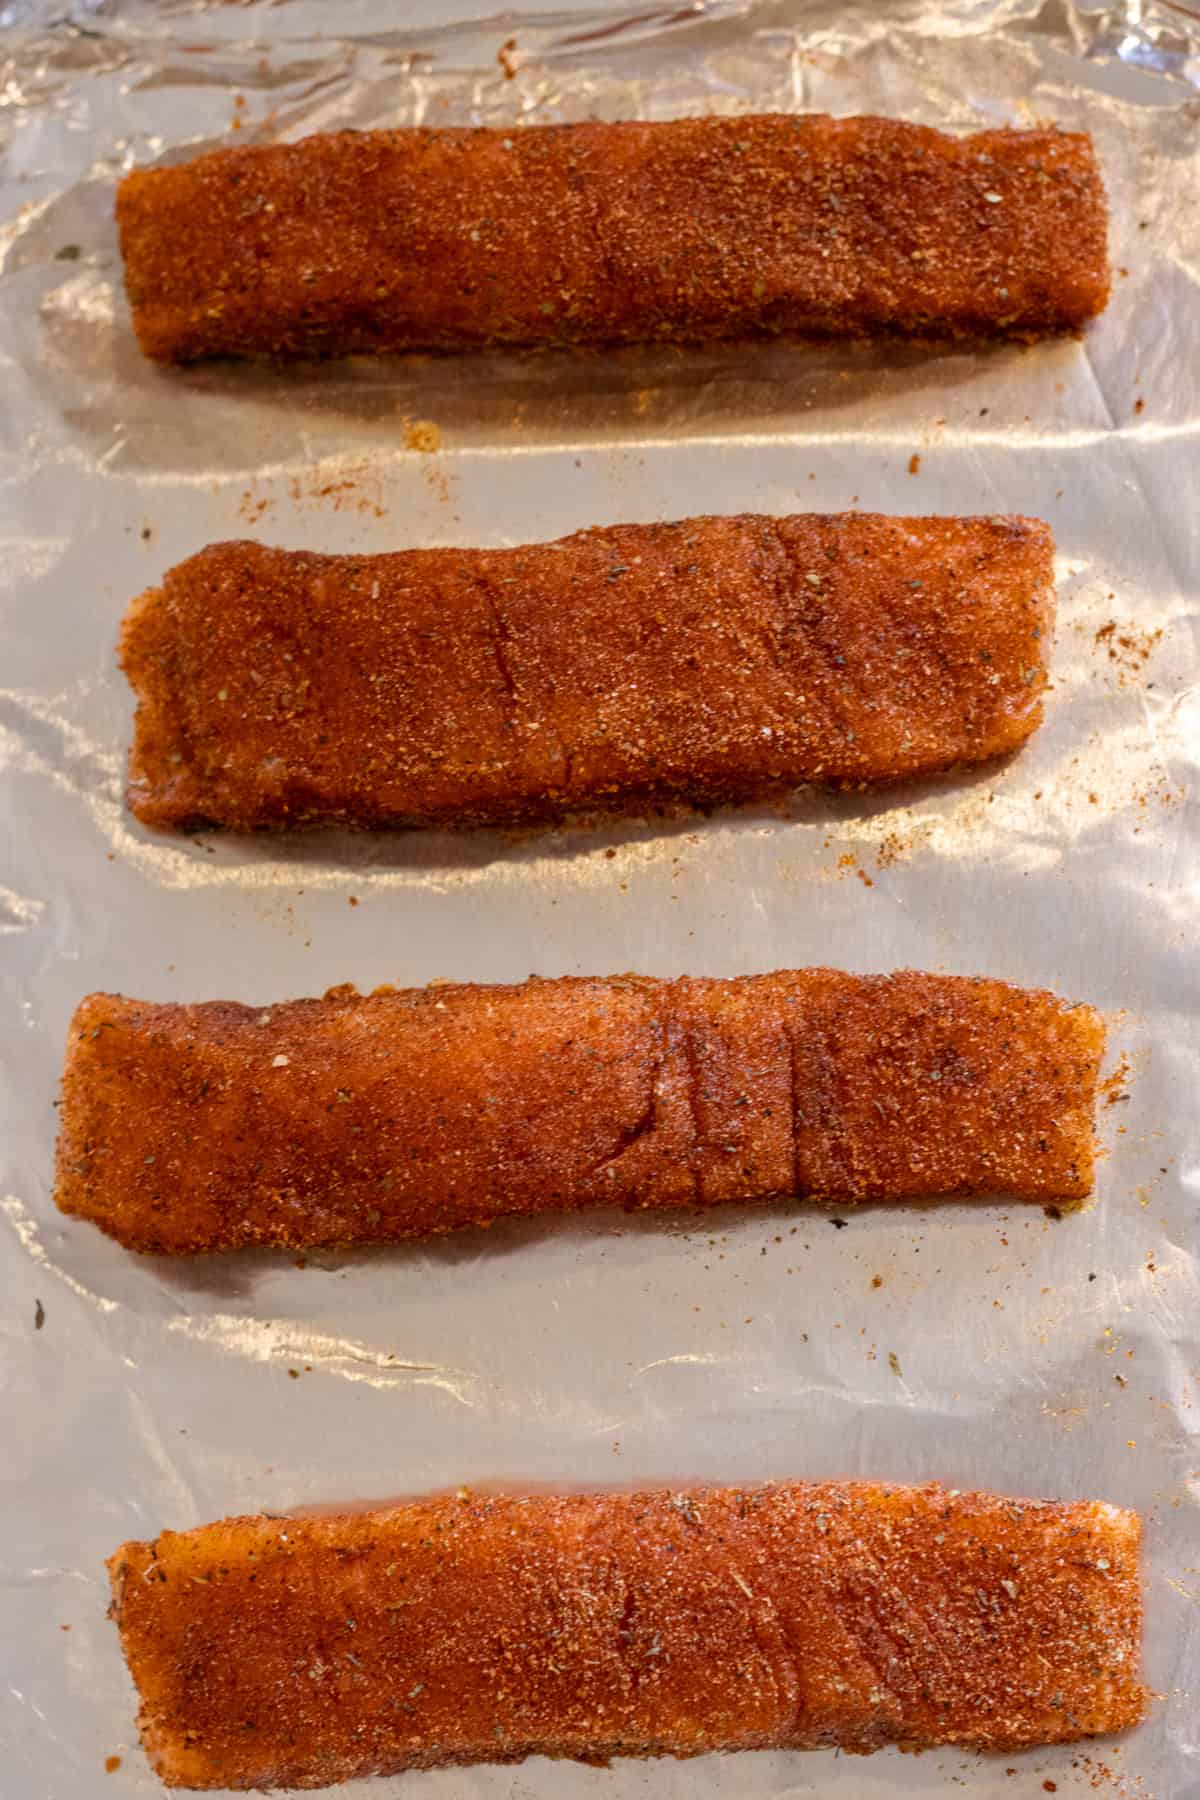 Four uncooked salmon filets coated in a blackening seasoning on a foil-lined baking sheet.